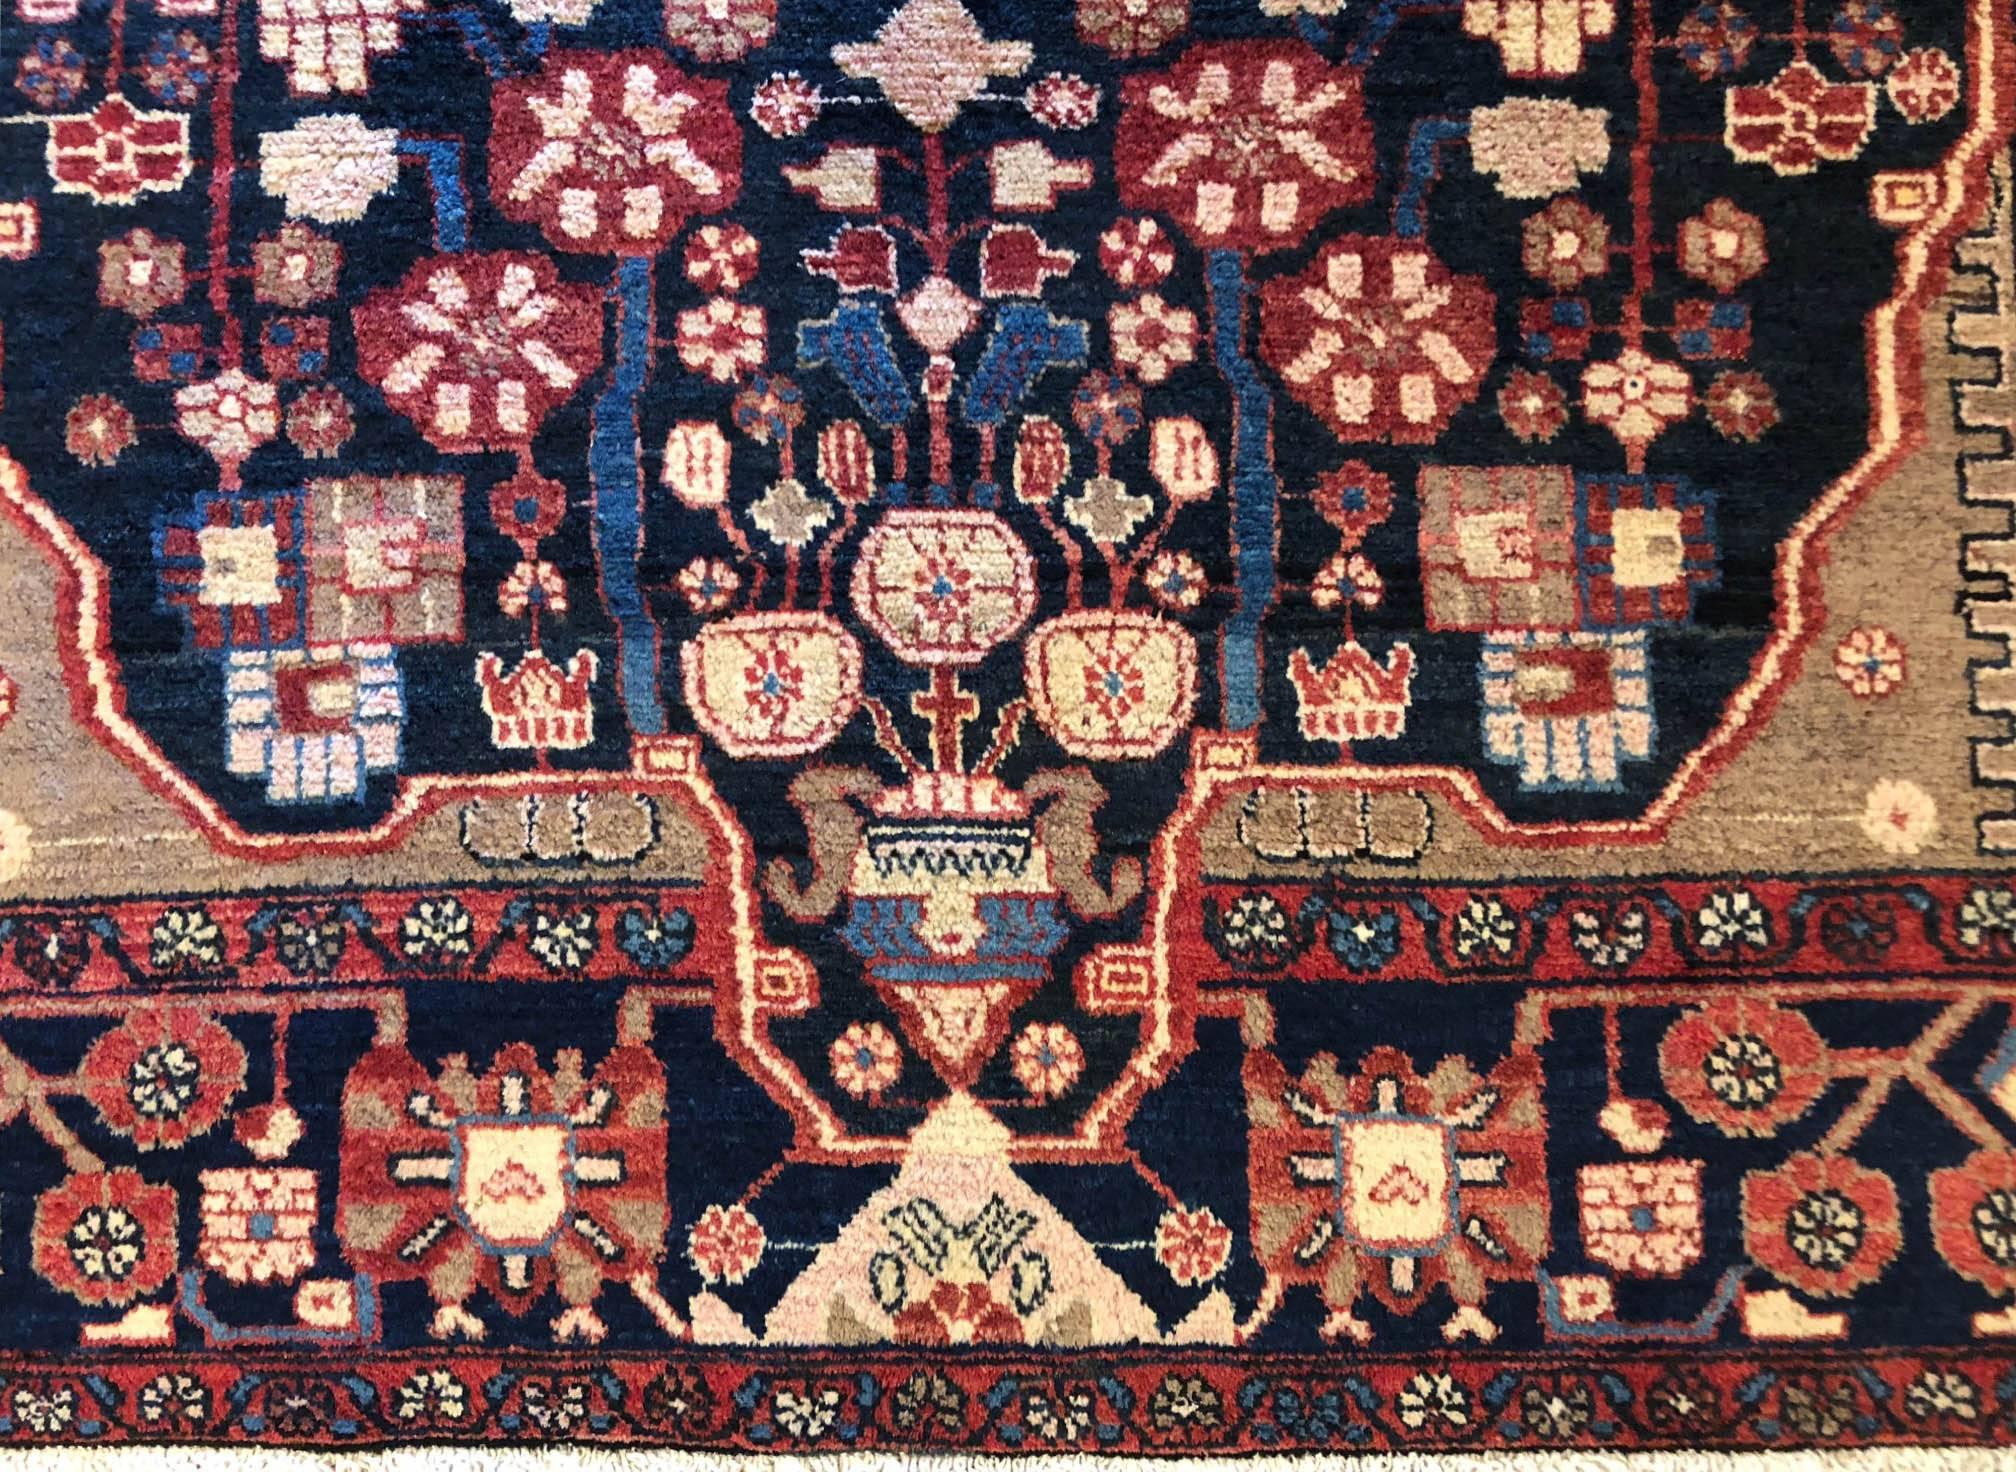 This piece is Persian Hamadan with wool pile and cotton foundation. Persian Hamadan rugs are easily recognized with their pattern and color combinations. The colors re dominated by different nuances of indigo blue, salmon or rose color. This rug is